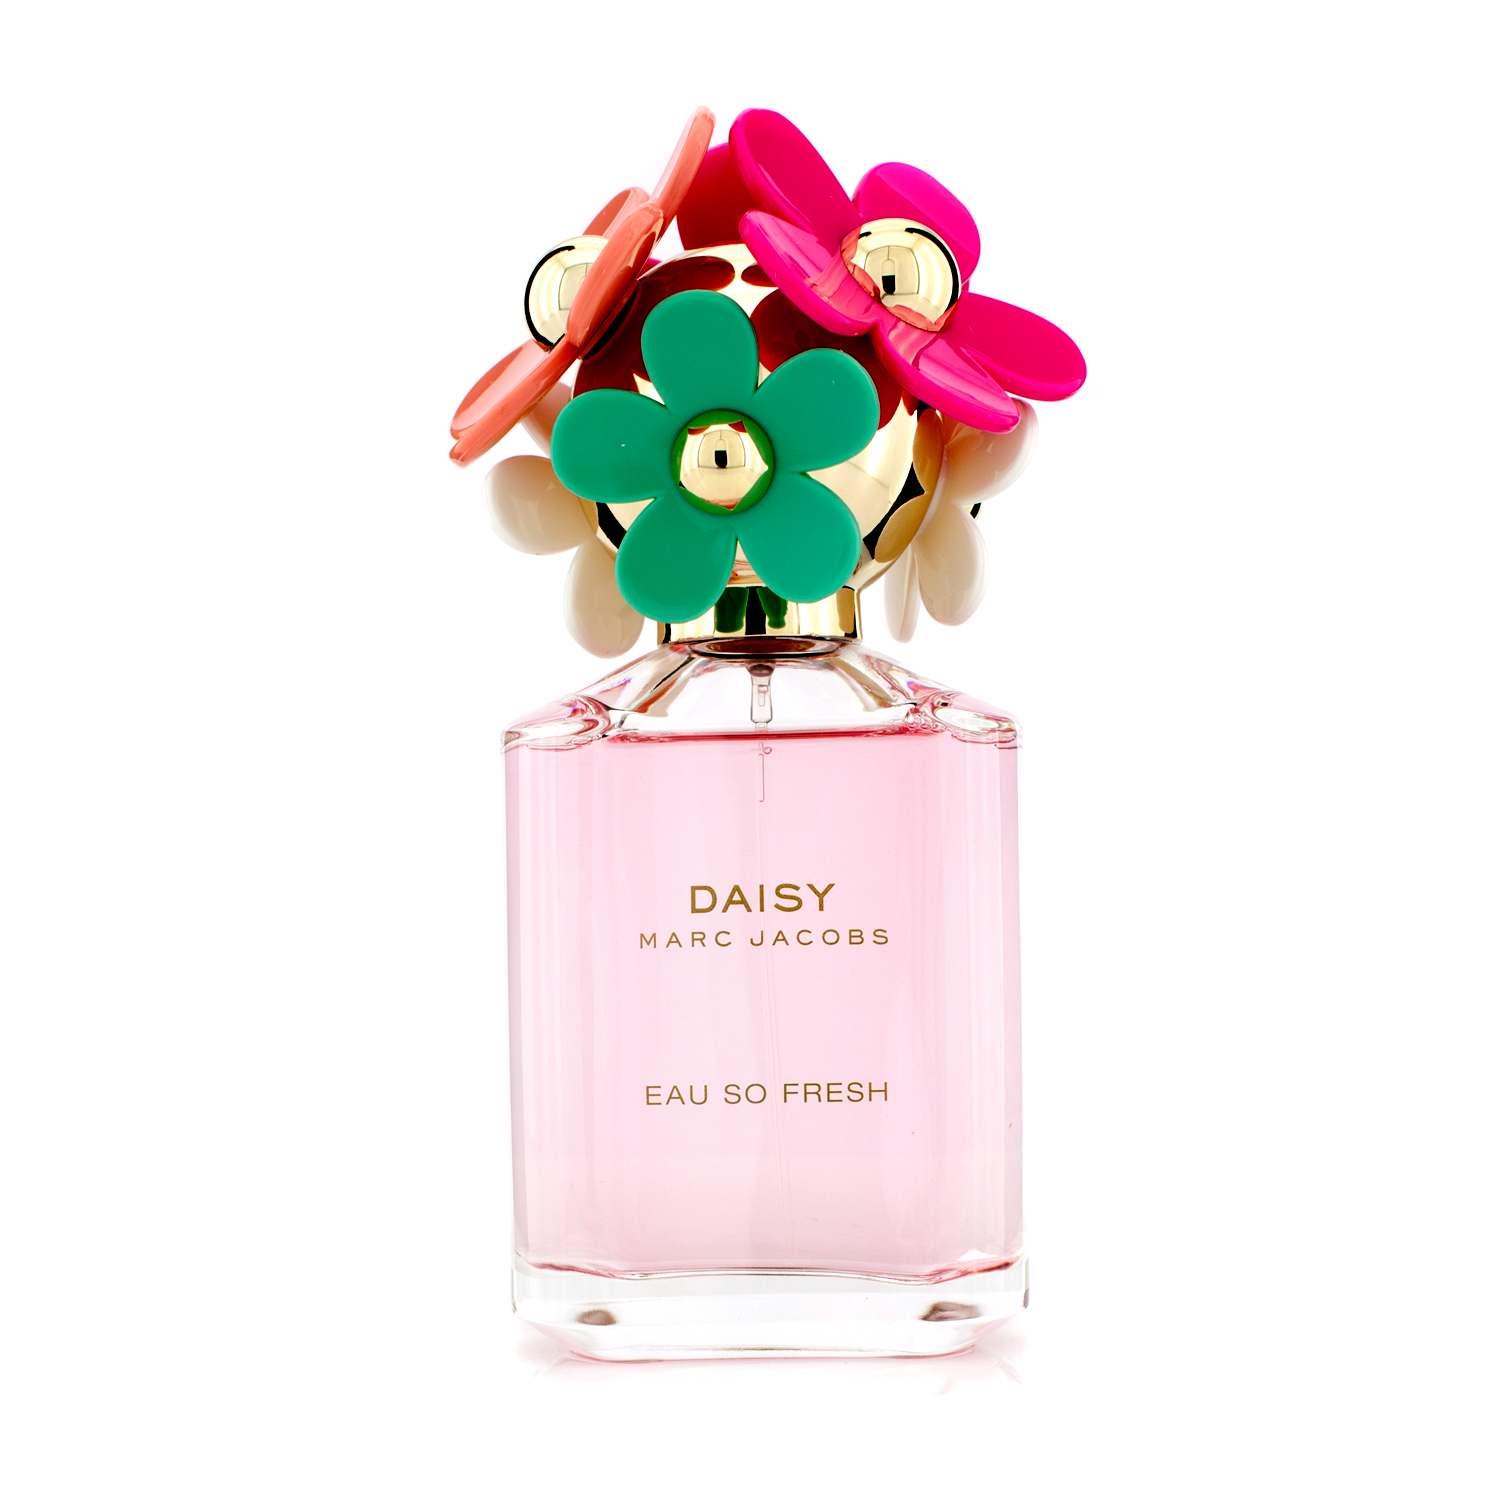 Daisy Eau So Fresh Delight by Marc Jacobs - Perfume for Women